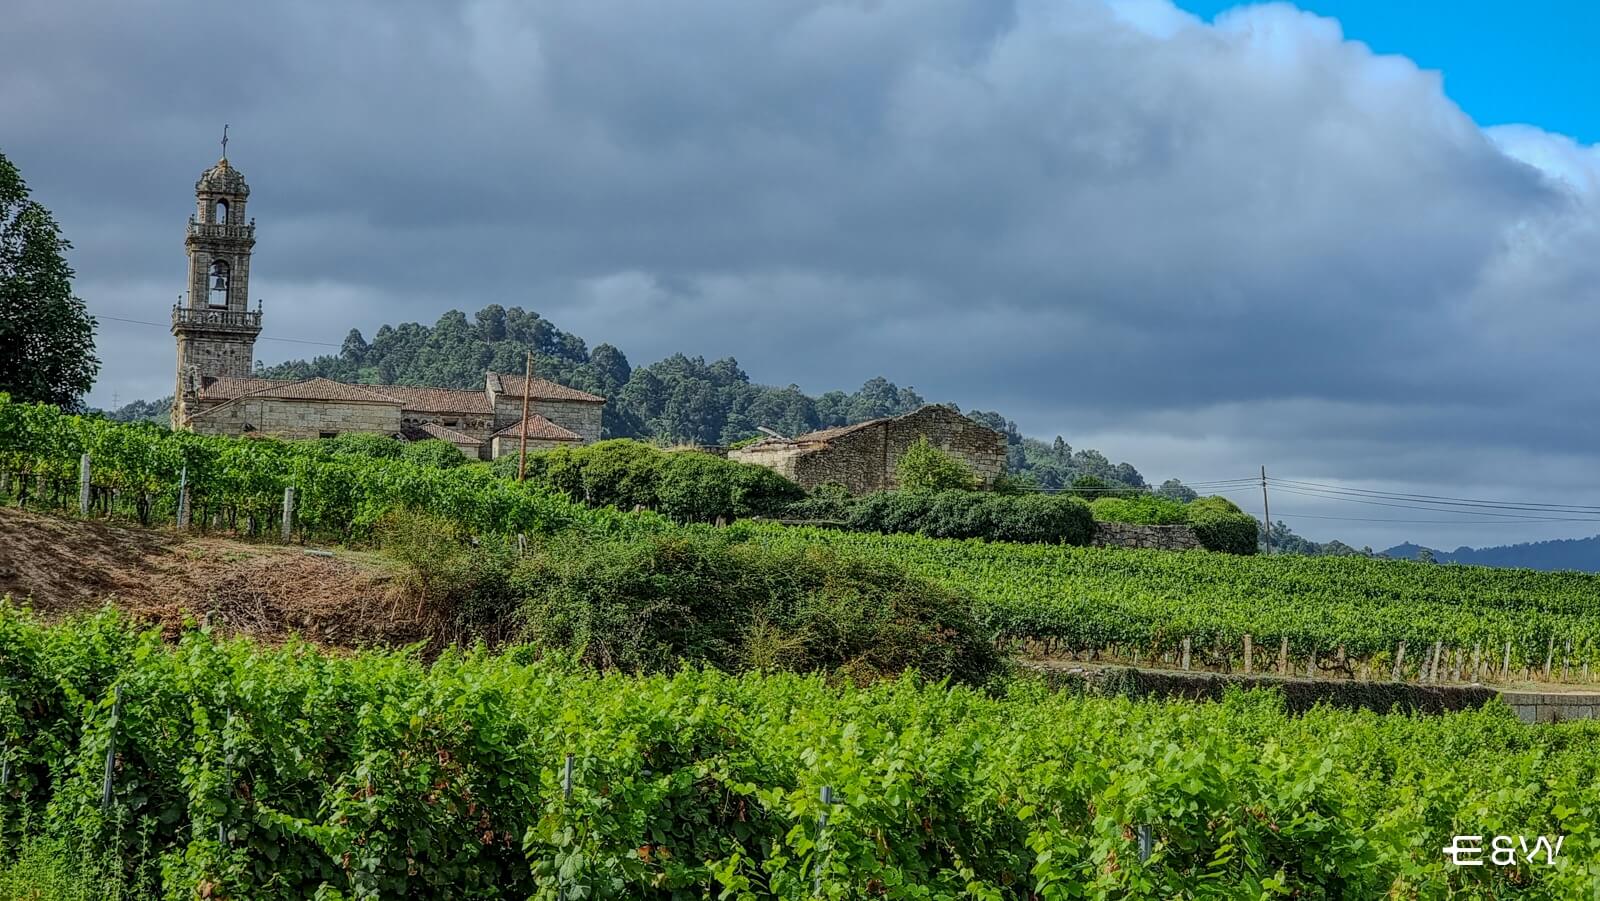 What to do in Galicia? Our top plans - Gastronomic and wine tours in Ribadavia and Arbo